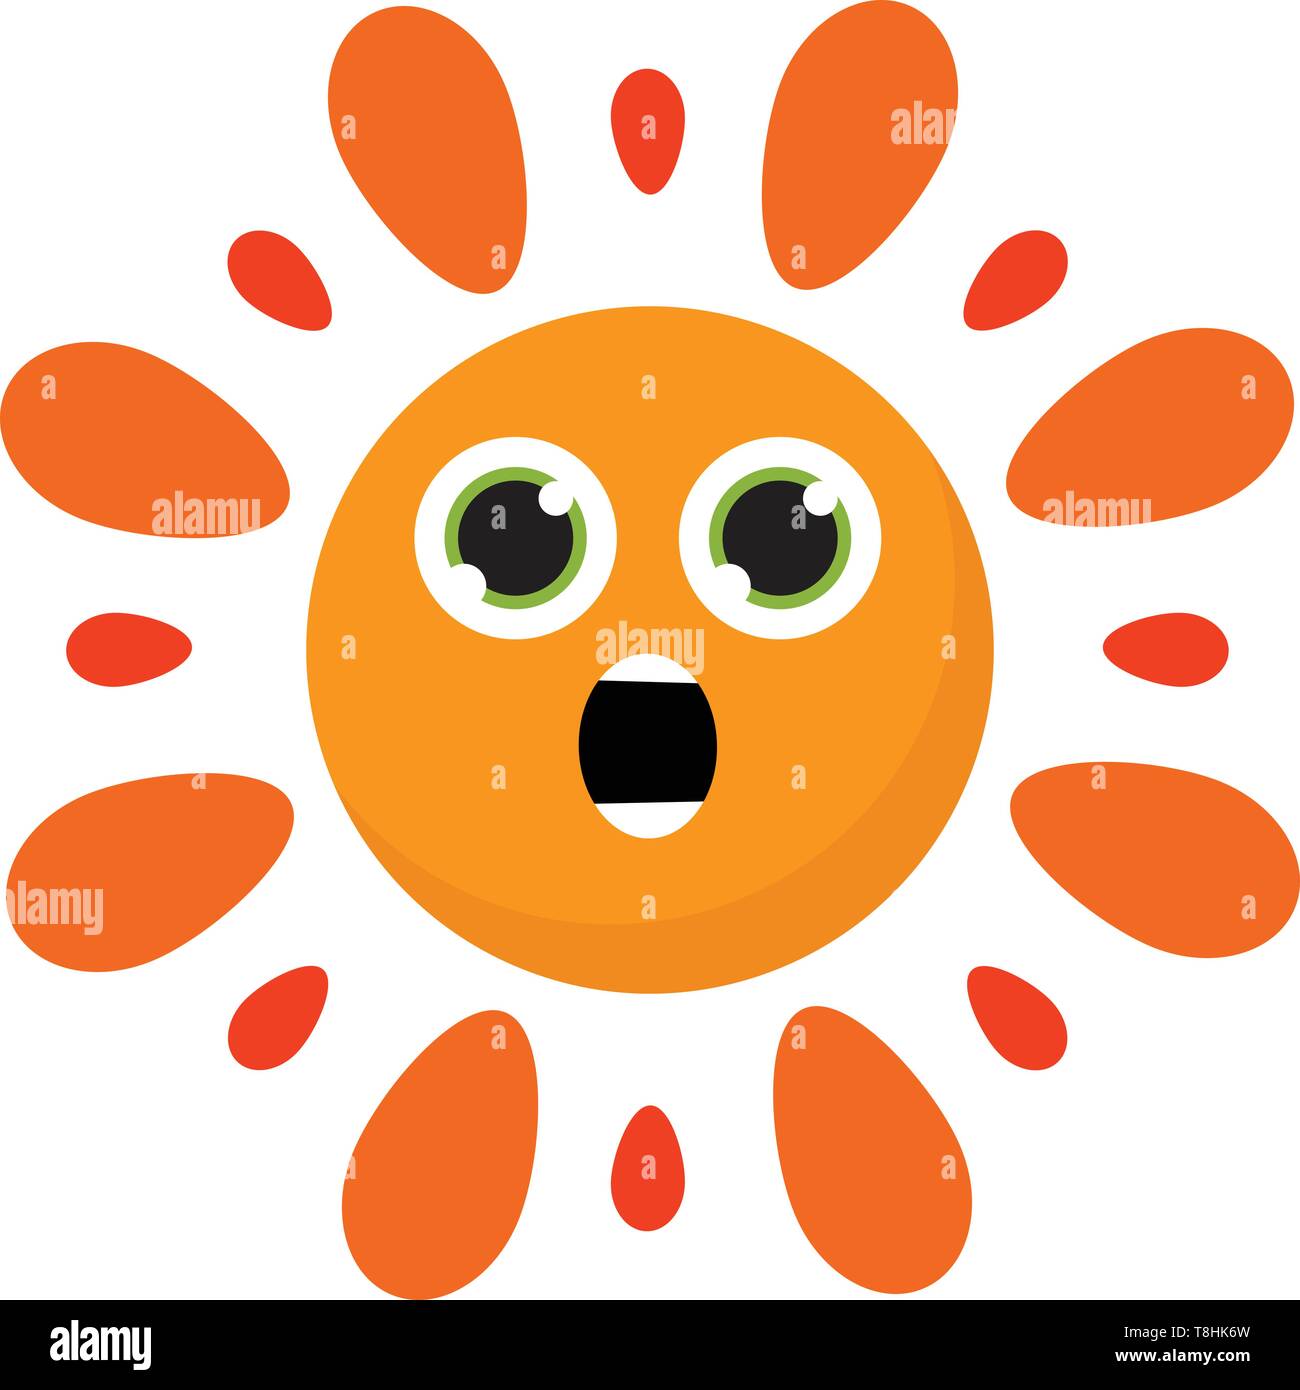 Clipart of the astonished hot burning sun has few orange spikes surrounding the inner circular yellow disc with two green eyes and a mouth, vector, co Stock Vector